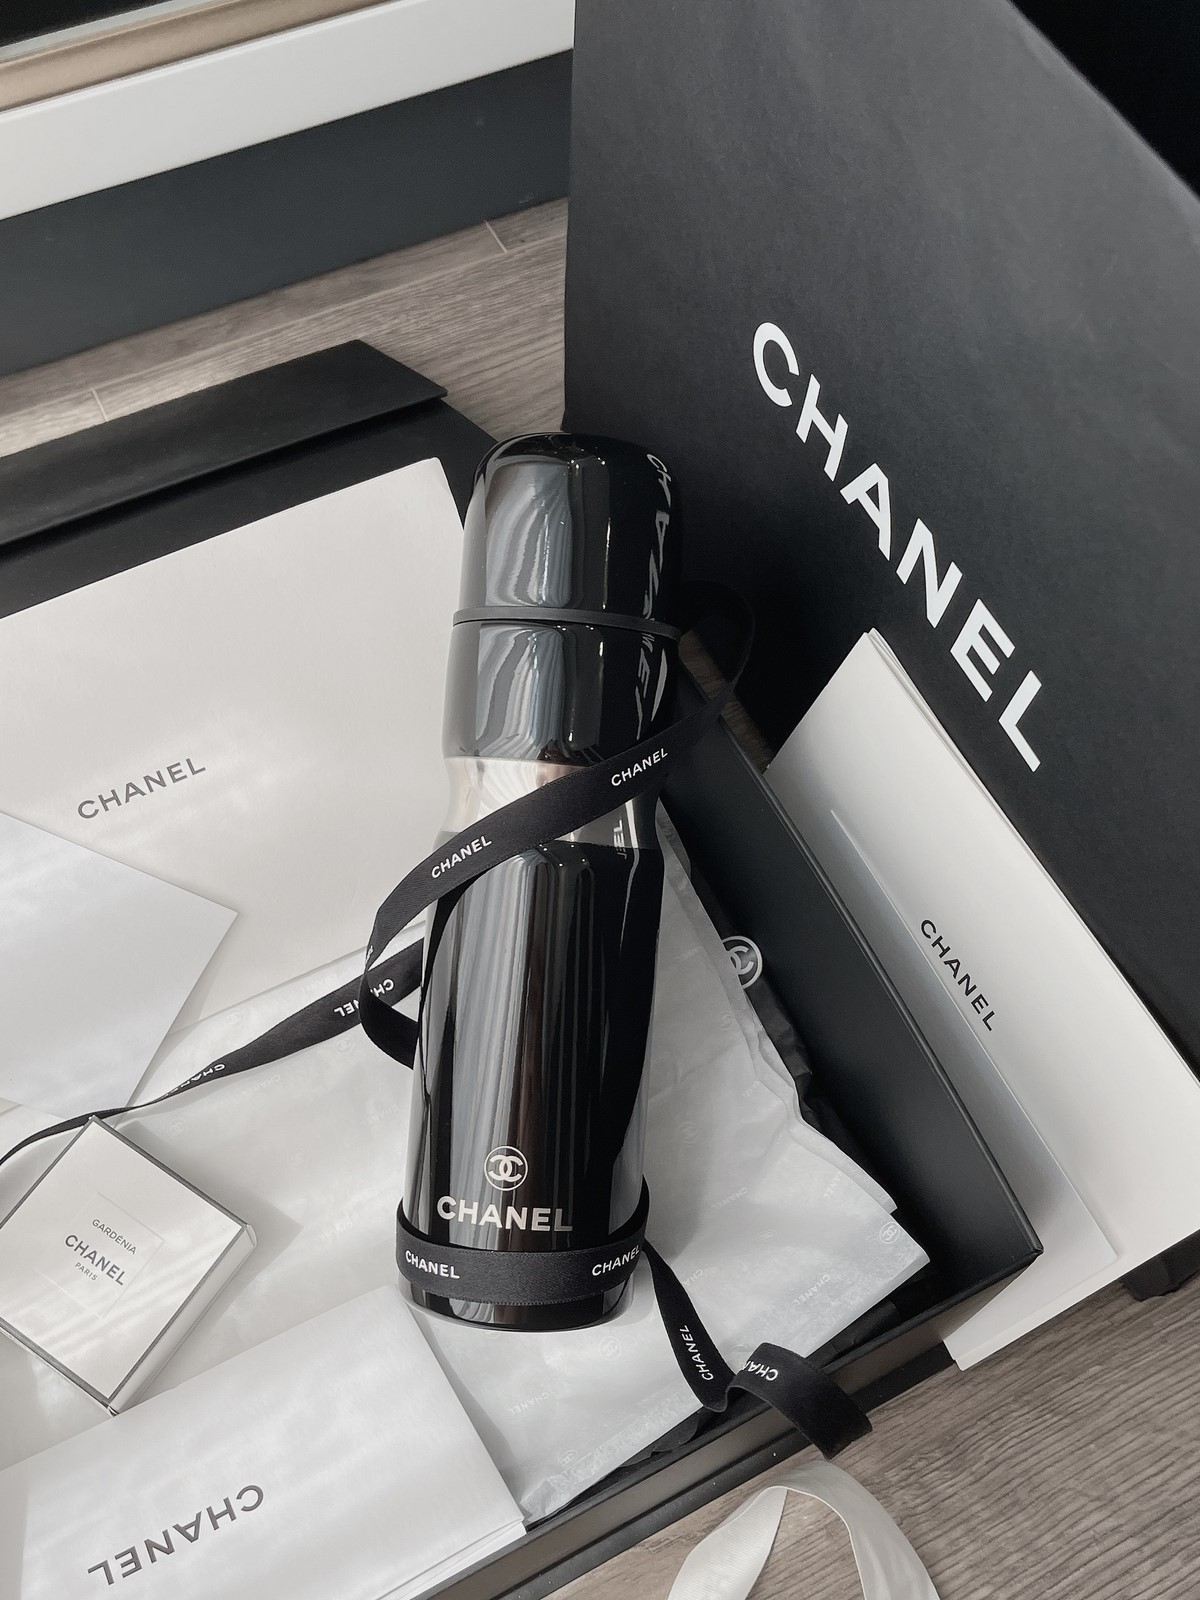 LY GIỮ NHIỆT IN LOGO CHANEL  Vinaly Gift